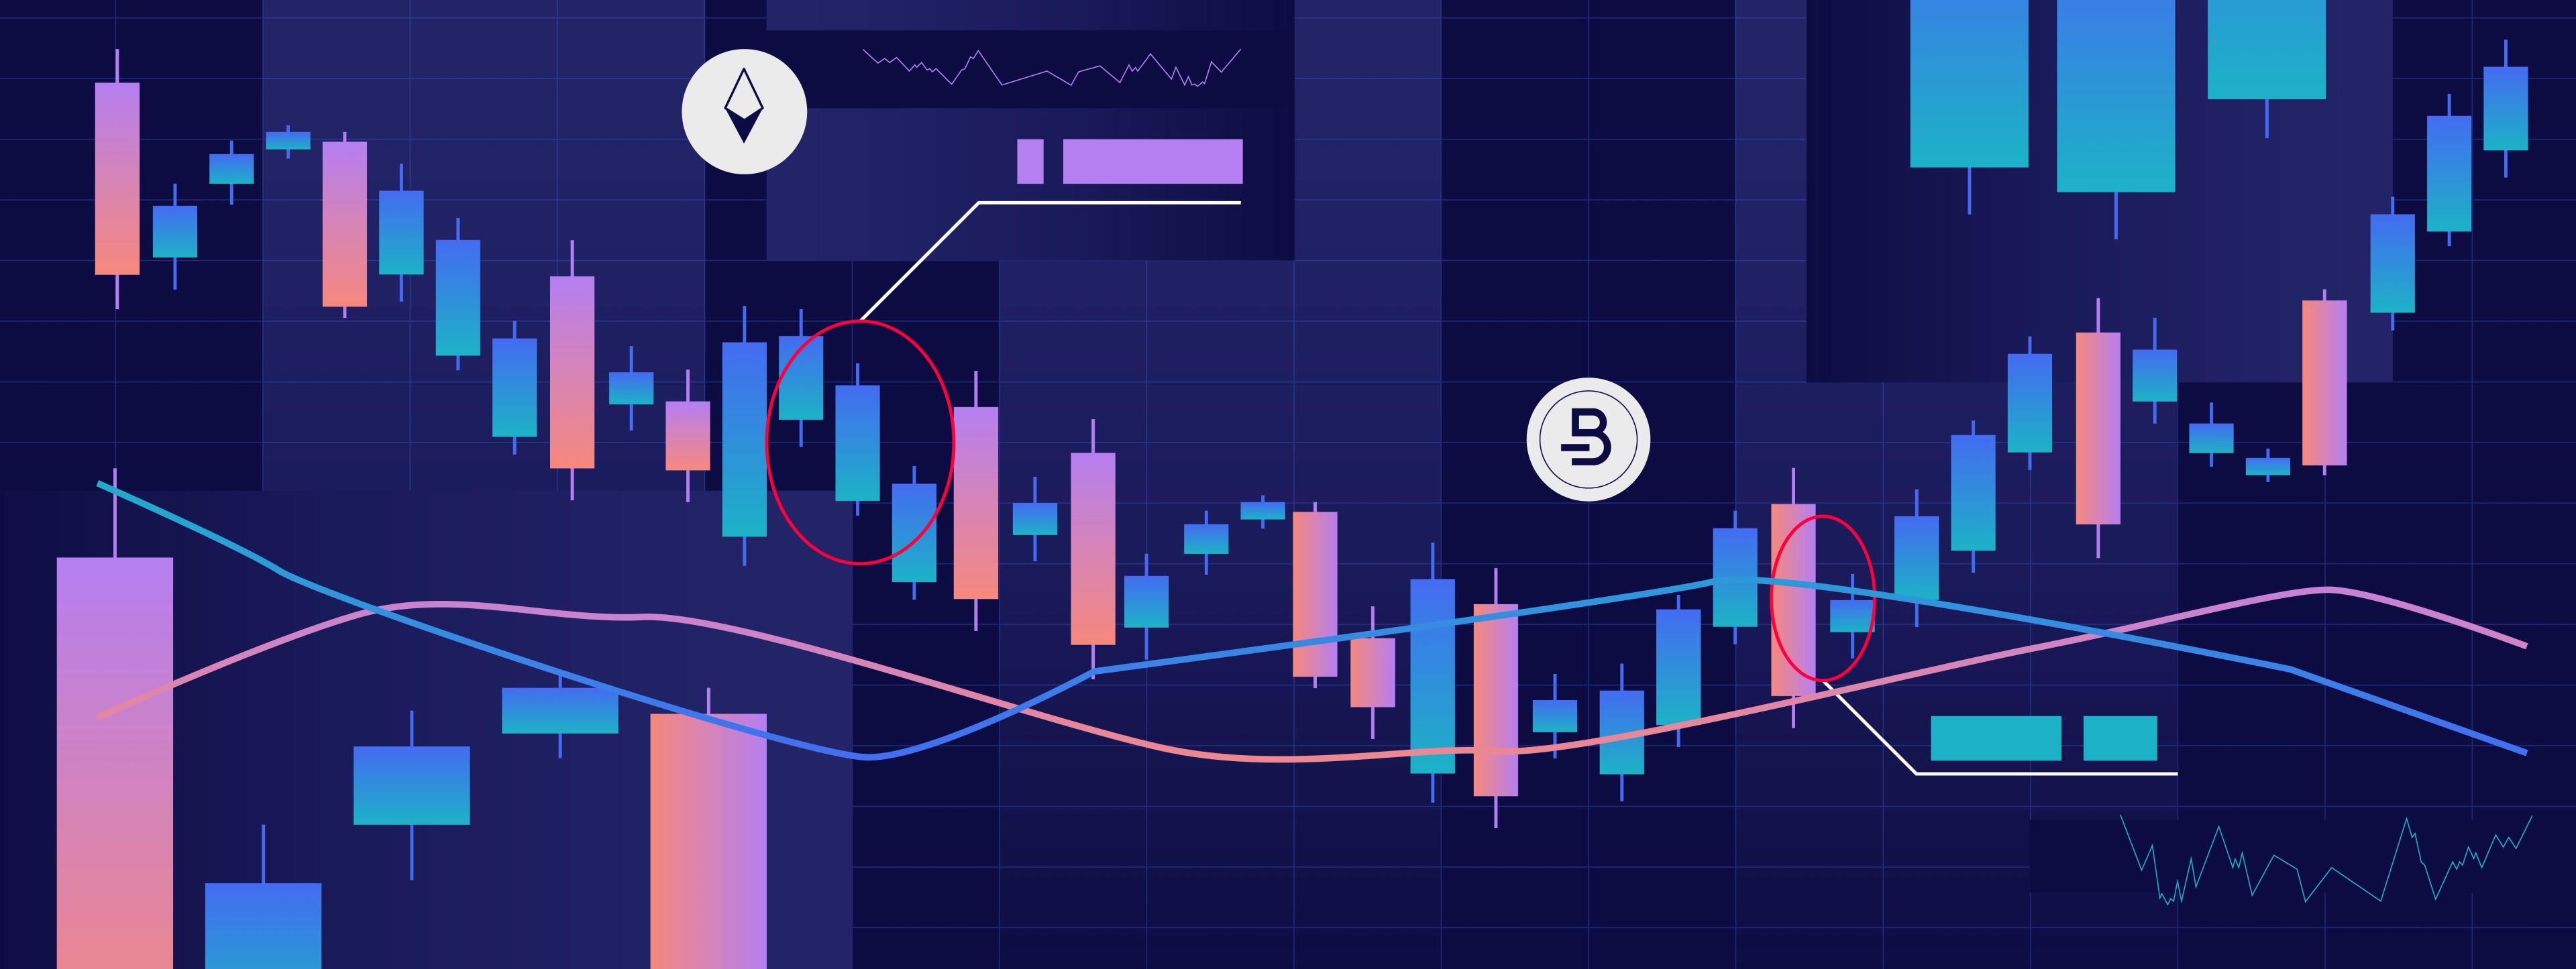 Crypto trading 101: What are Moving Averages (MA)